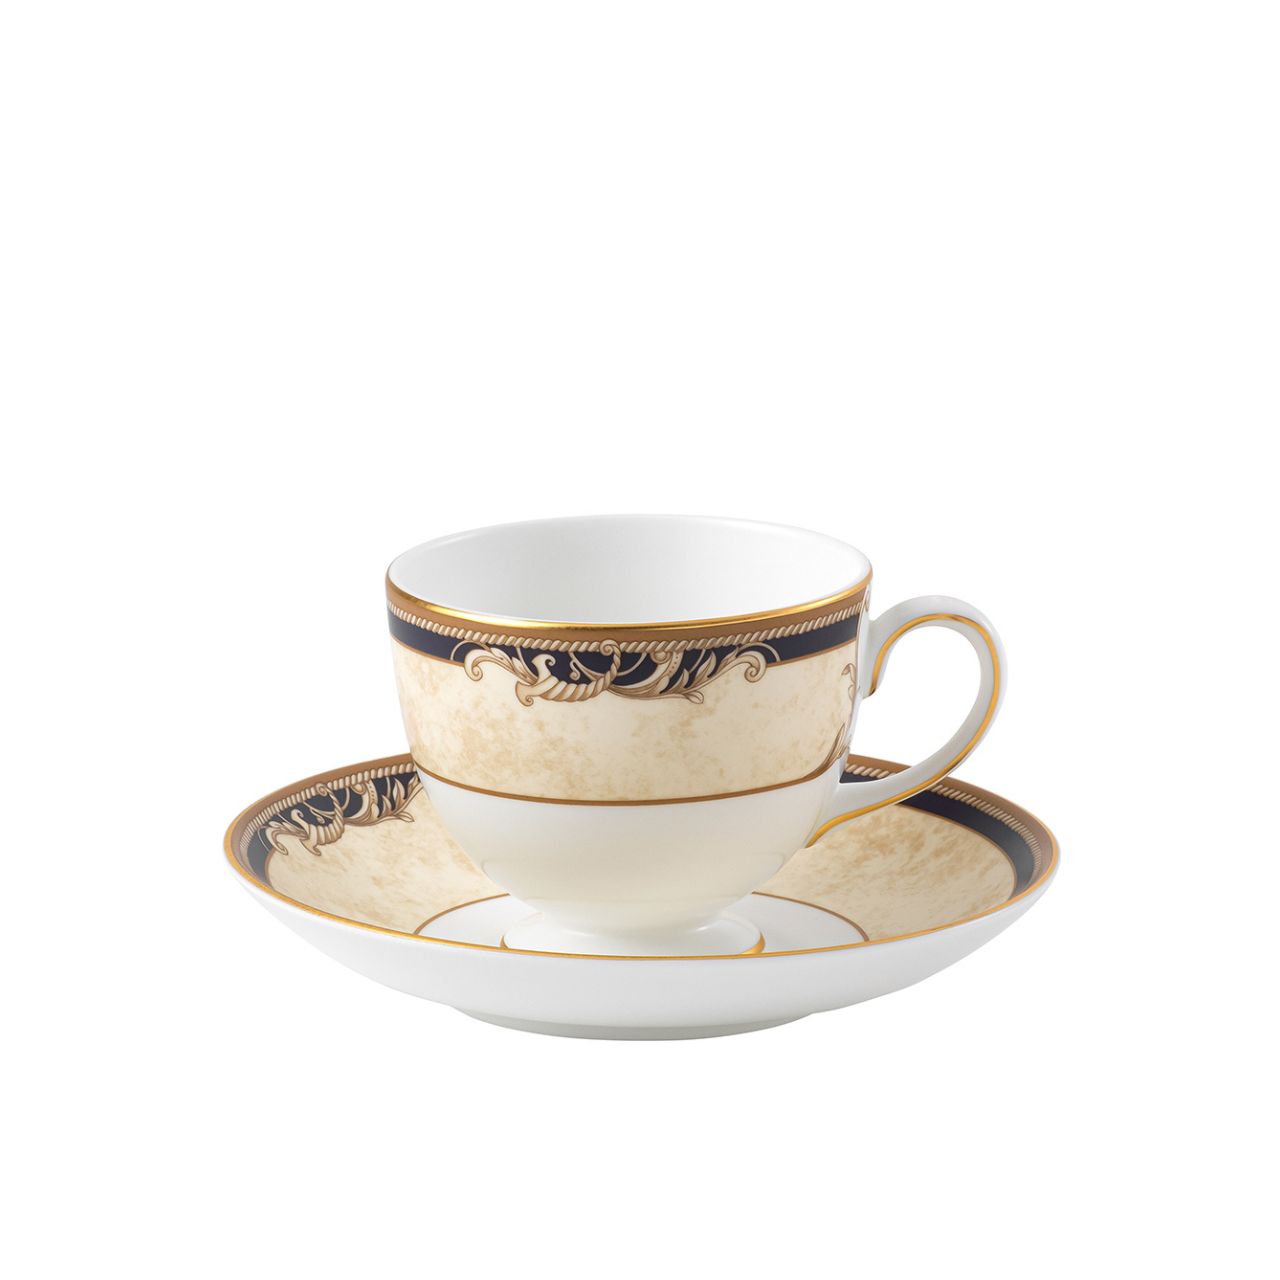 Cornucopia Teacup by Wedgwood  Saucer sold separately  Wedgwood Cornucopia is inspired by the mythical 'Horn of Plenty,' and is characterized by designs featuring legendary creatures like unicorns and satyrs.